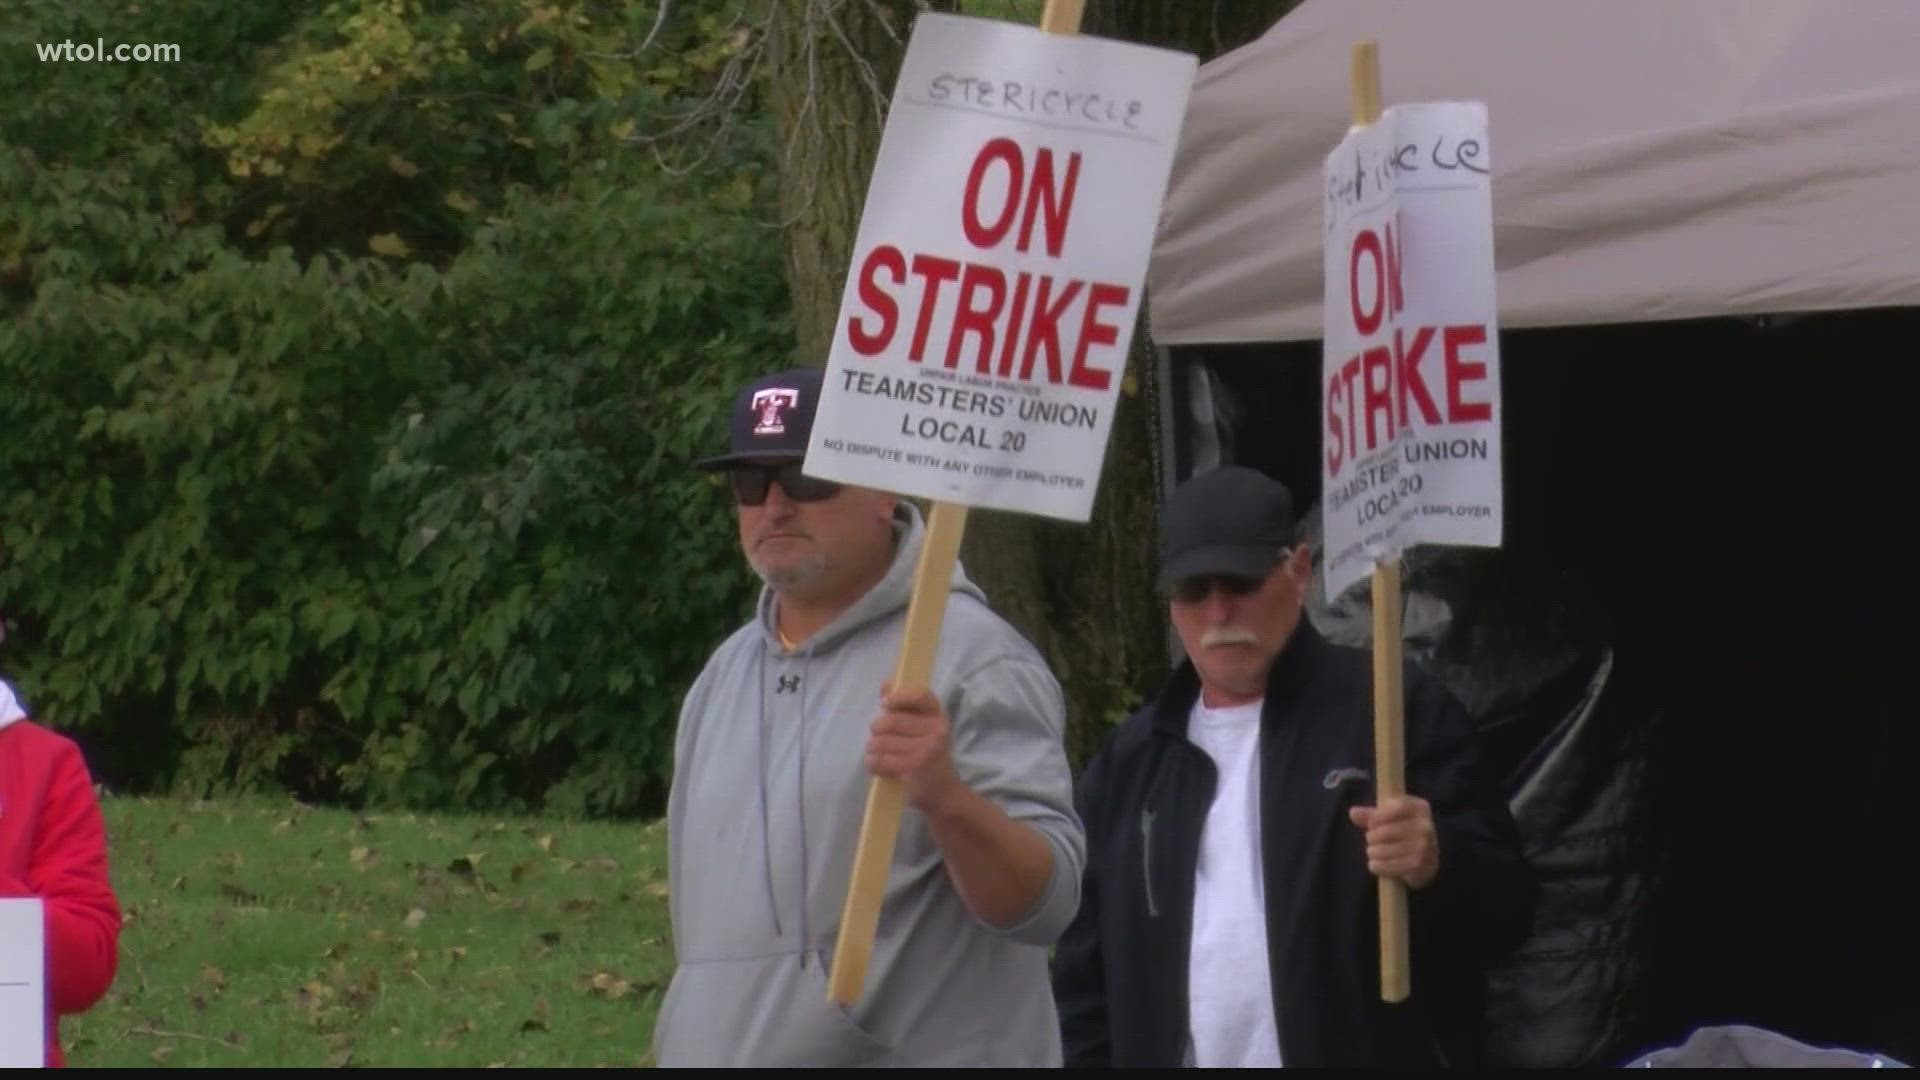 The company says they have brought in additional facility workers and drivers during the work stoppage.